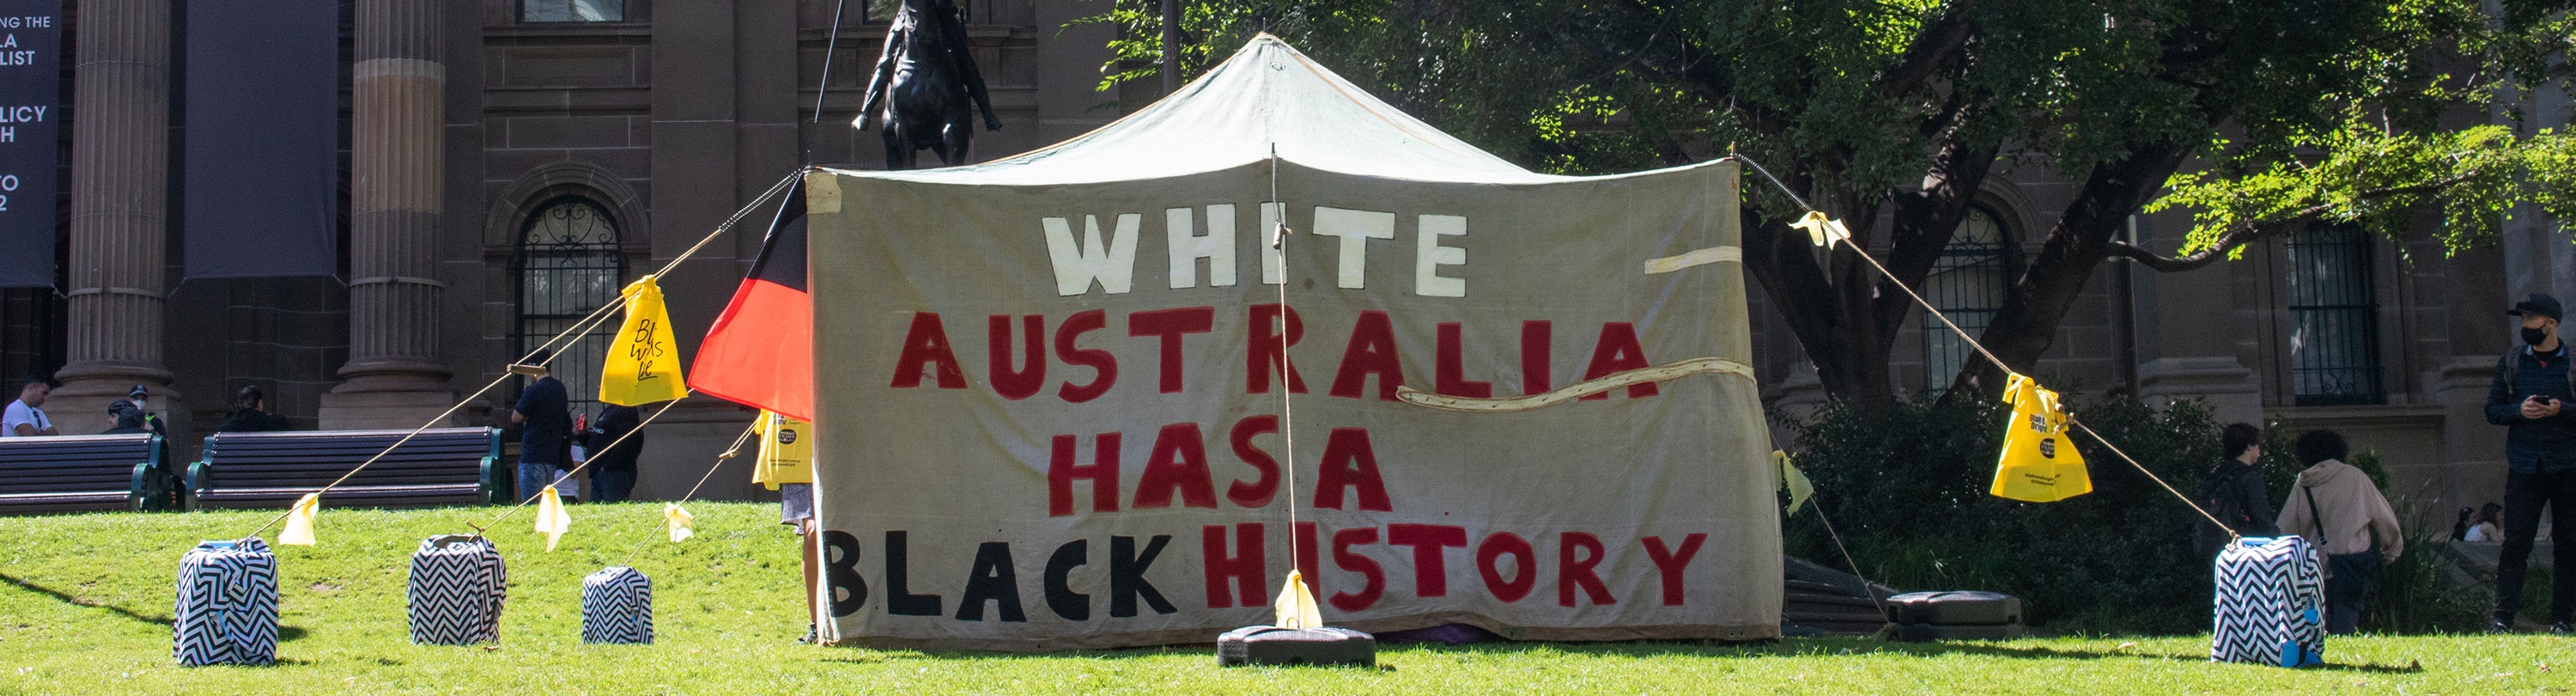 A hessian tent with the words "White Australia has a black history" painted on it